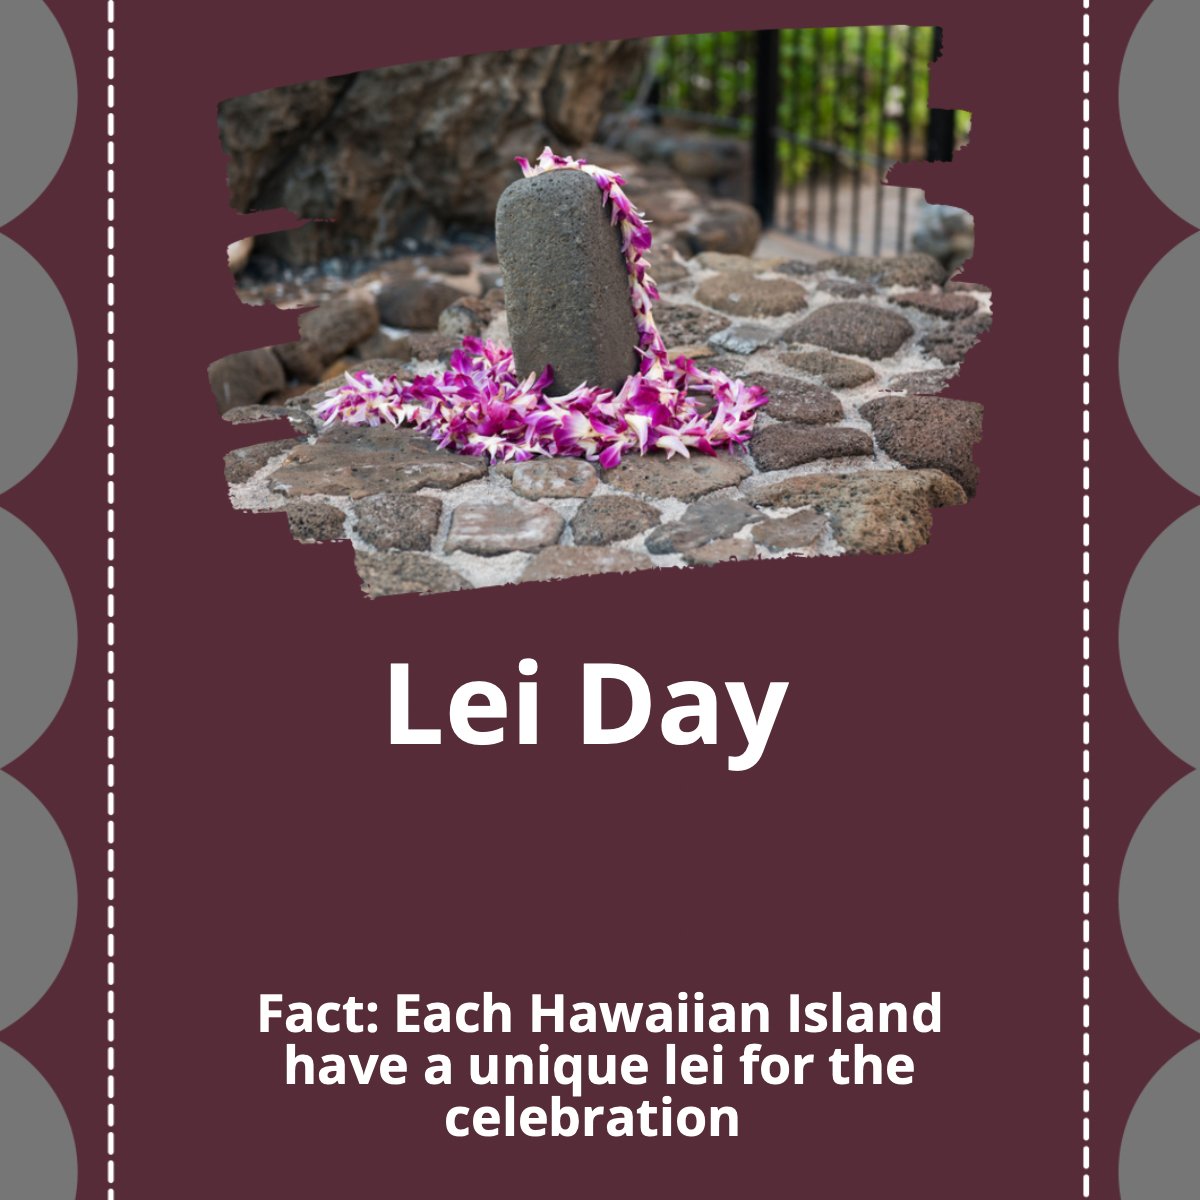 Happy Lei Day to all who celebrate 🙌!

Did you know? 🤔  Each Hawaiian island has a unique lei for the celebration. 😱

#lei #day #hawaii #flowers #celebration #grey
 #veteranhomebuyers #militaryhomebuyers #veteransellinghome #militarysellinghome #PCSmove